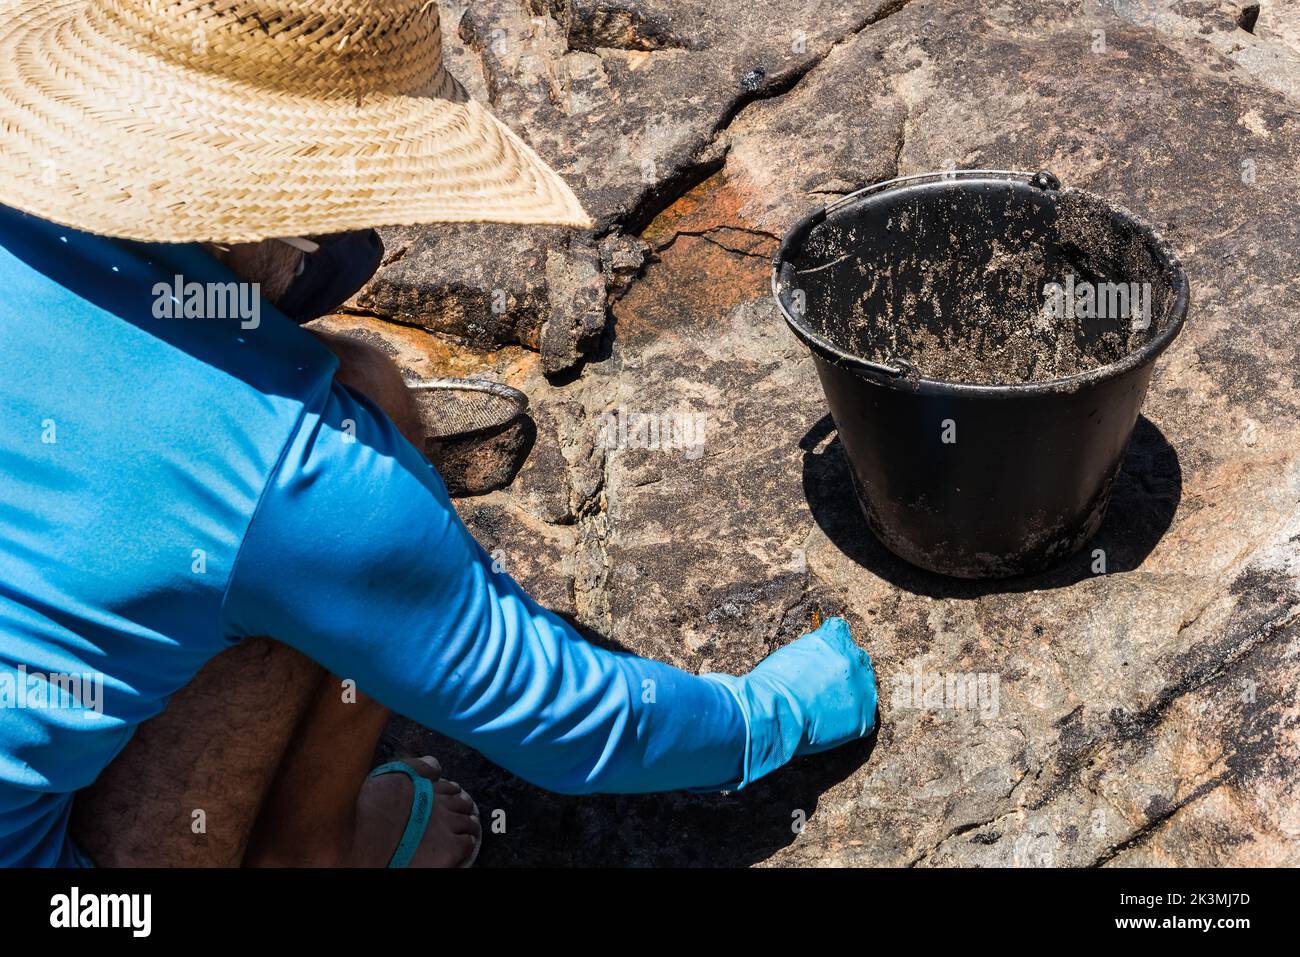 Salvador, Bahia, Brazil - October 26, 2019: Volunteers clean up oil at Pedra do Sal beach in the city of Salvador. The site was affected by an oil spi Stock Photo